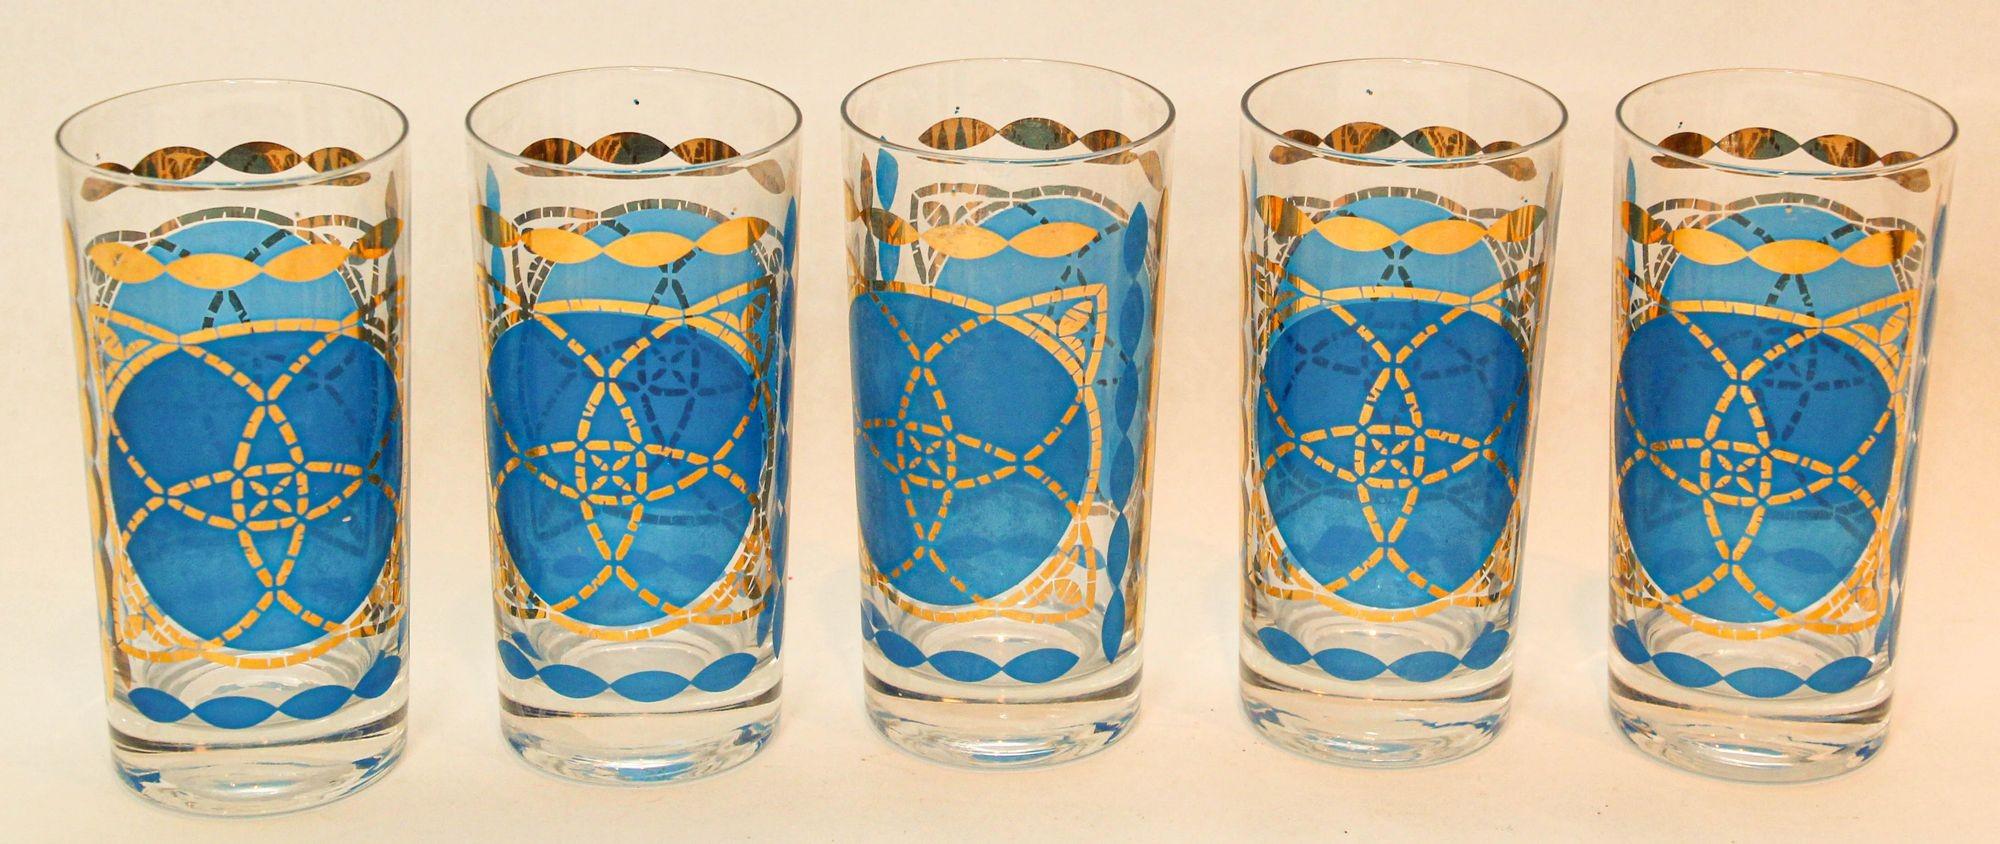 Hollywood Regency 1960s Georges Briard Highball Cocktail Glasses Blue and Gold Design Set of 5